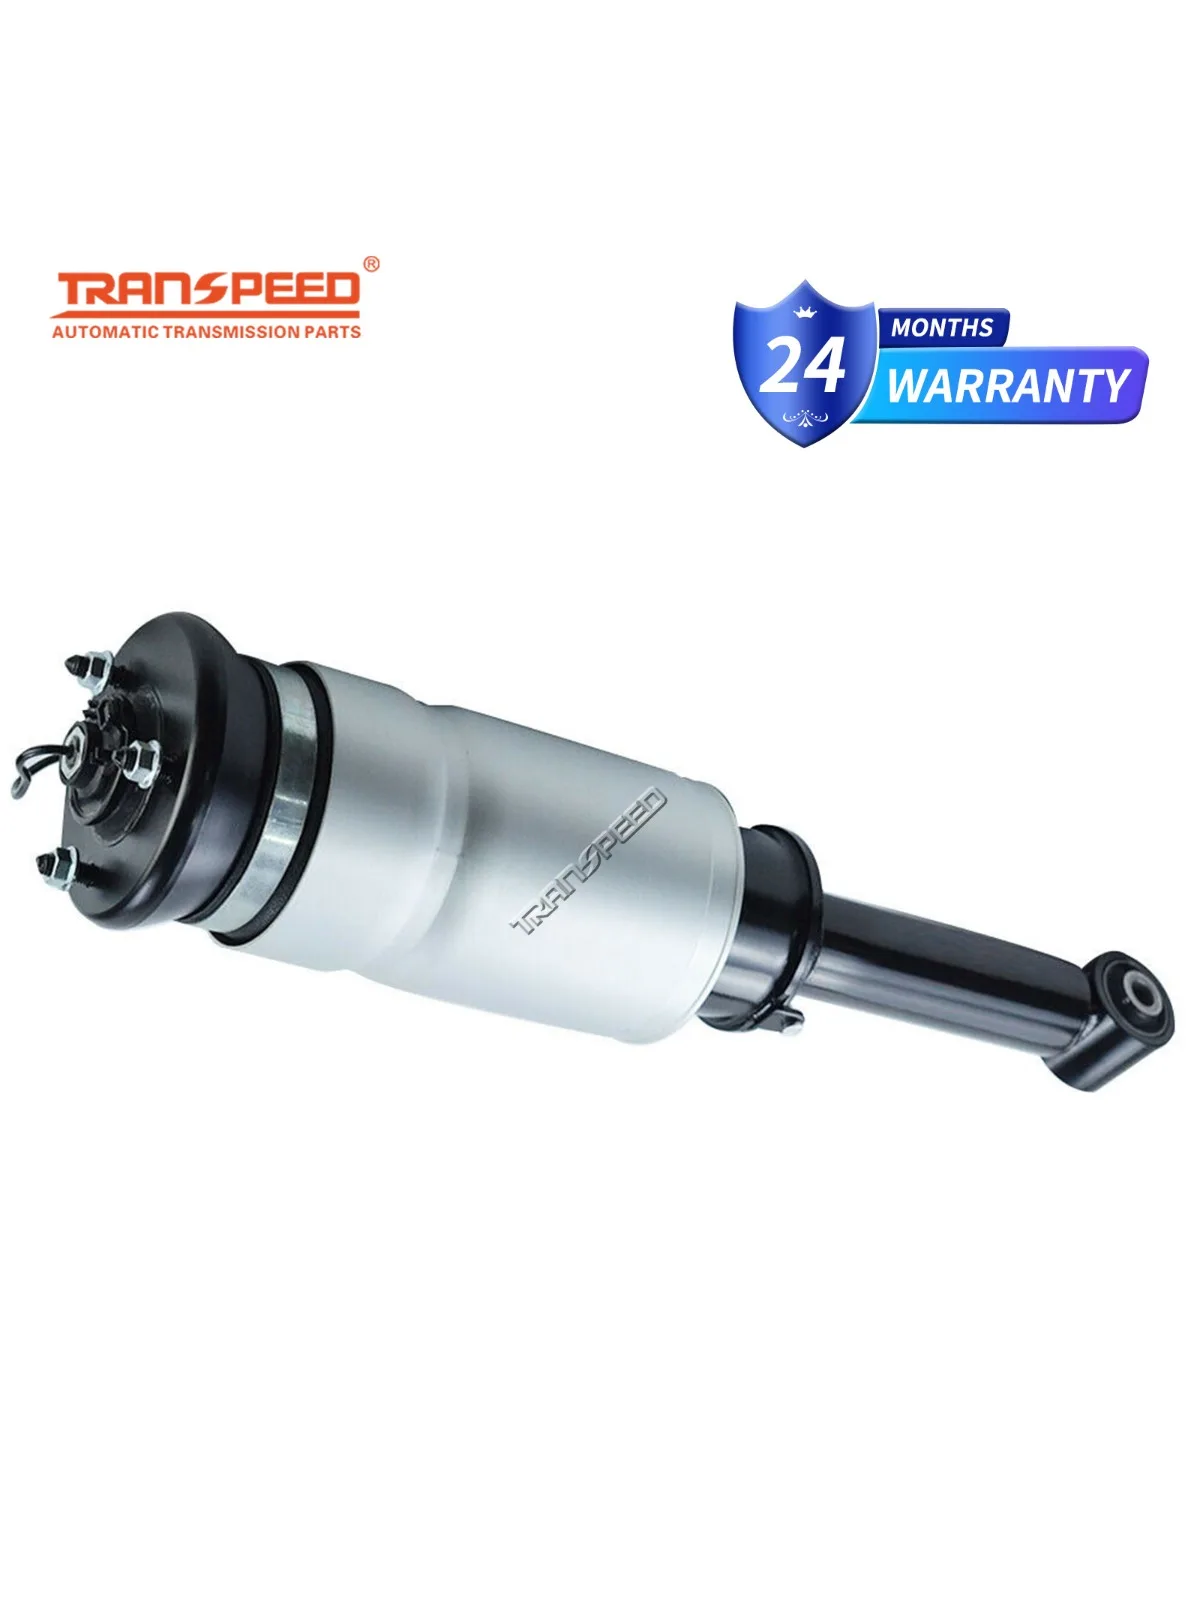 Air Suspension Model LR019994 Front Front Left And Right Shock Absorber Land Rover F4 LR019993